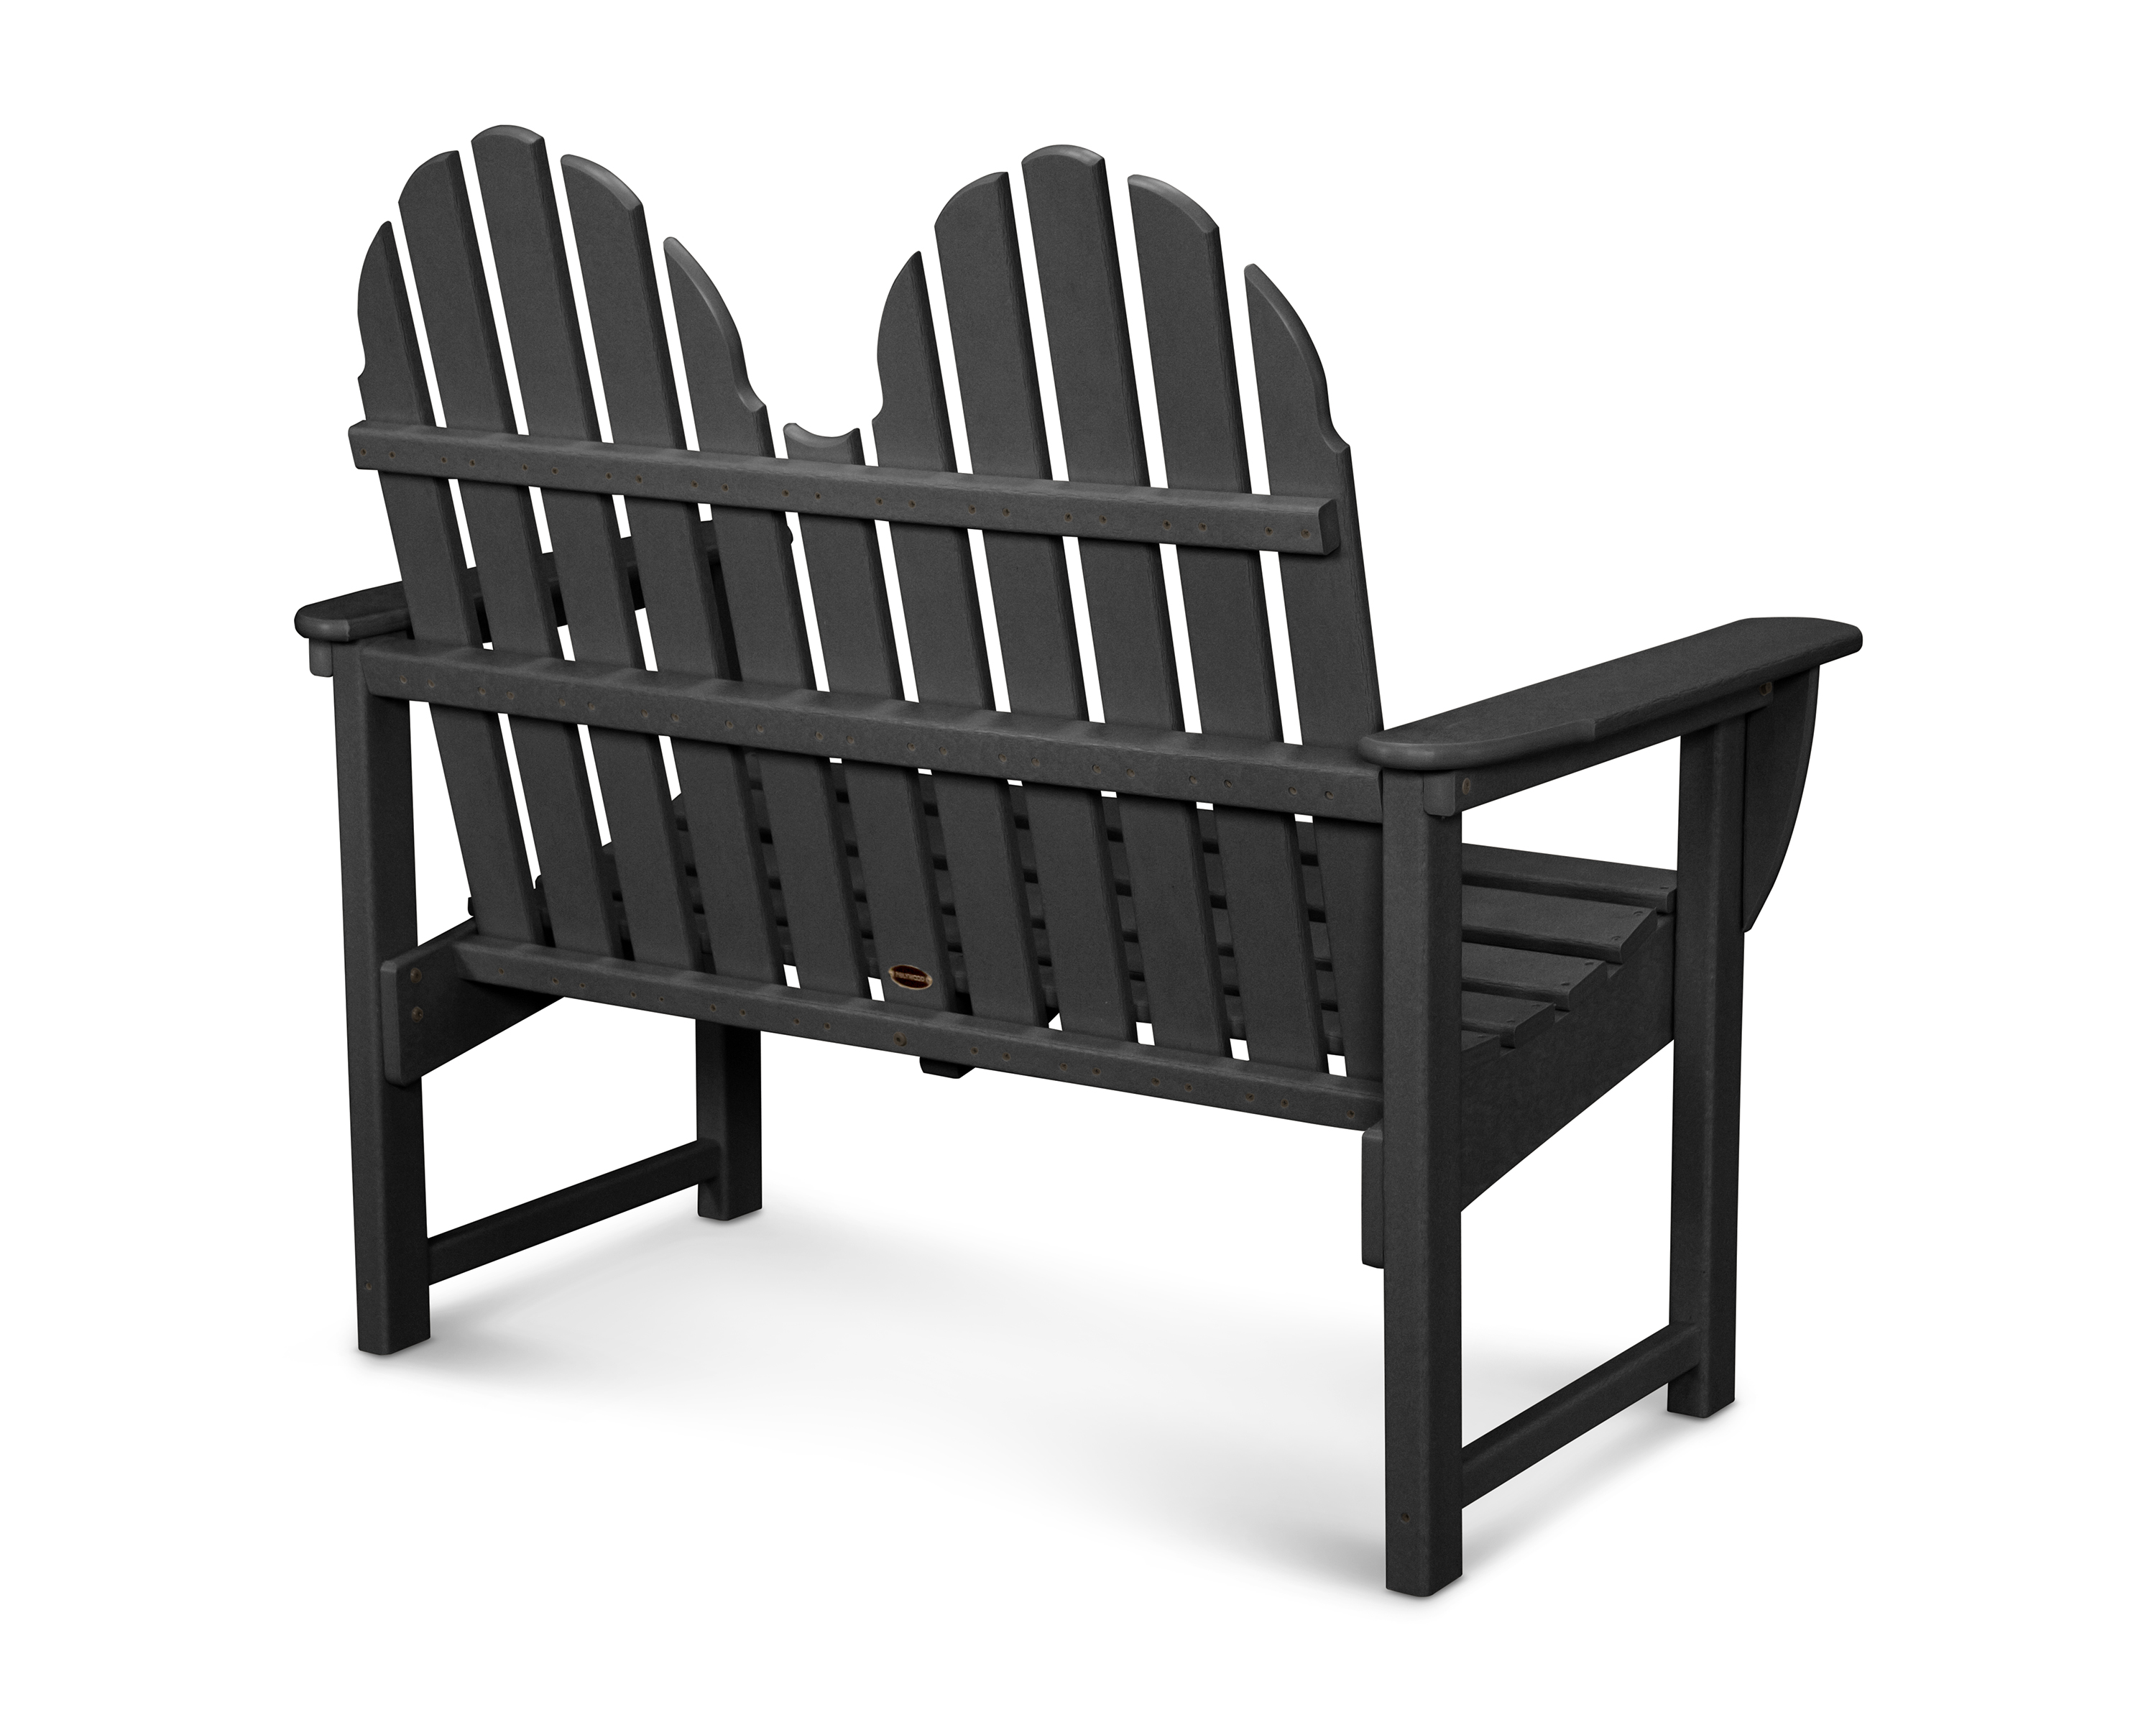 Enjoy Time With Someone Special In The Classic Adirondack For Two. Polywood Furniture Is Constructed Of Solid Polywood Lumber That